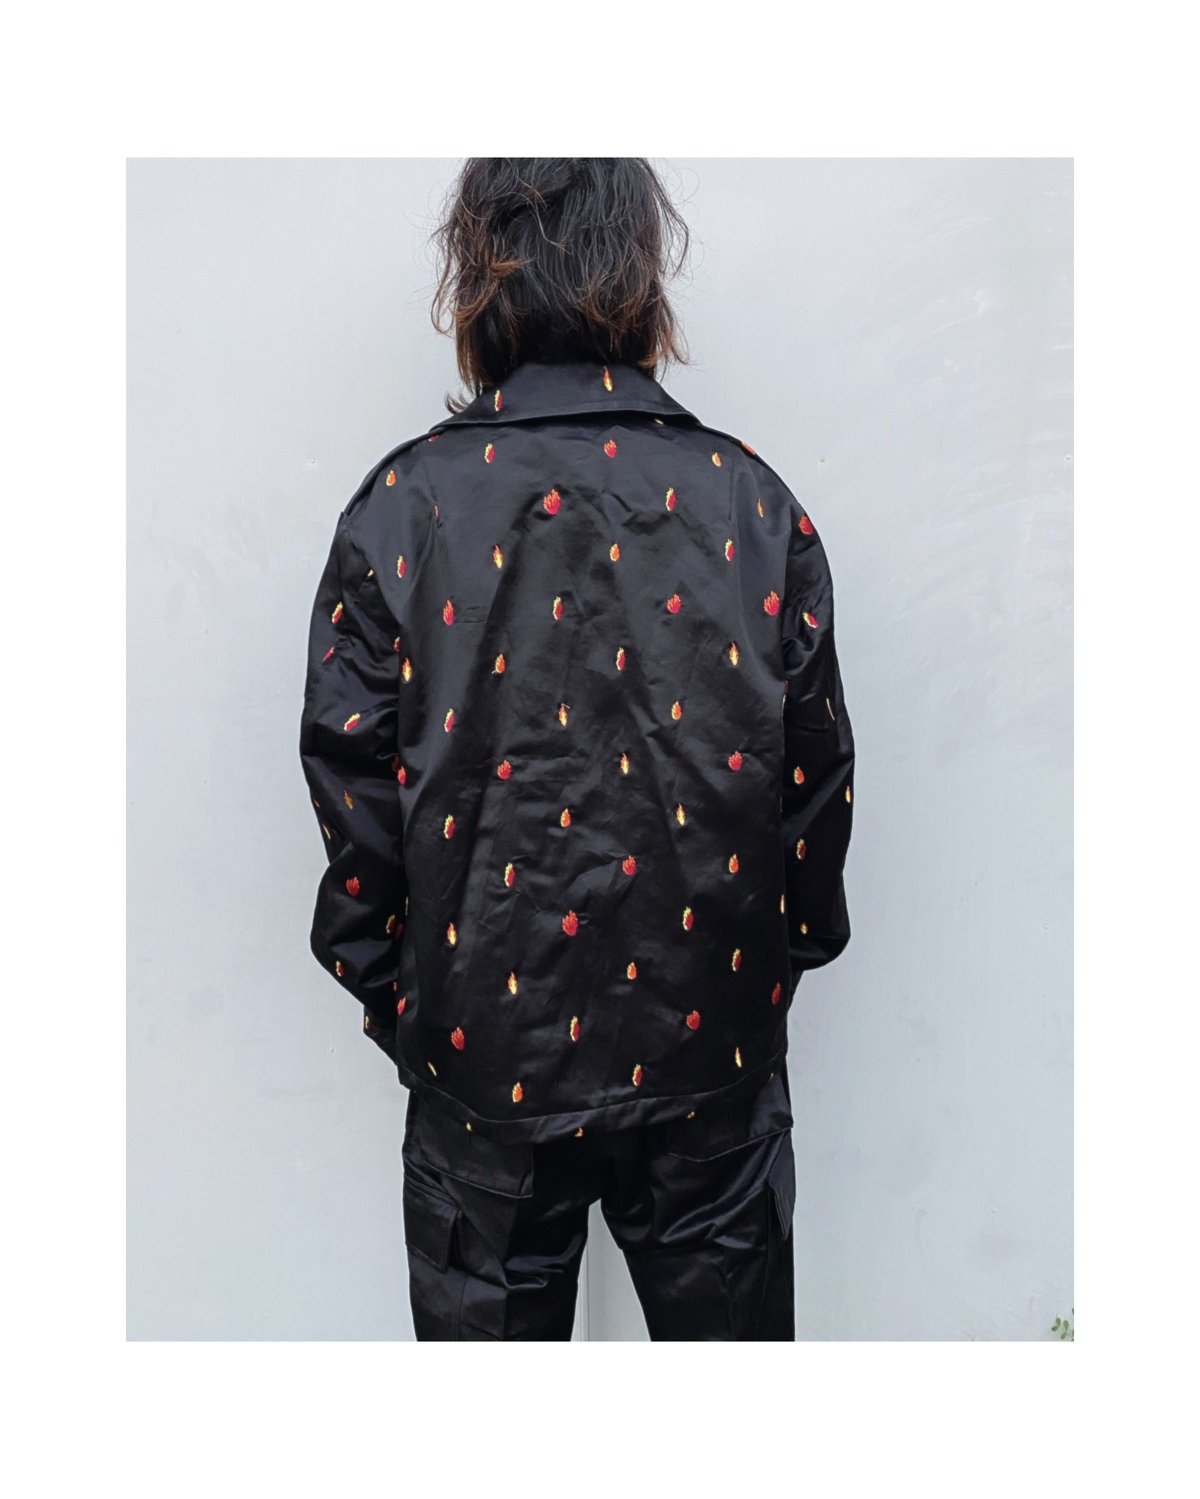 SON OF THE CHEESE「FIRE SATIN JACKET」